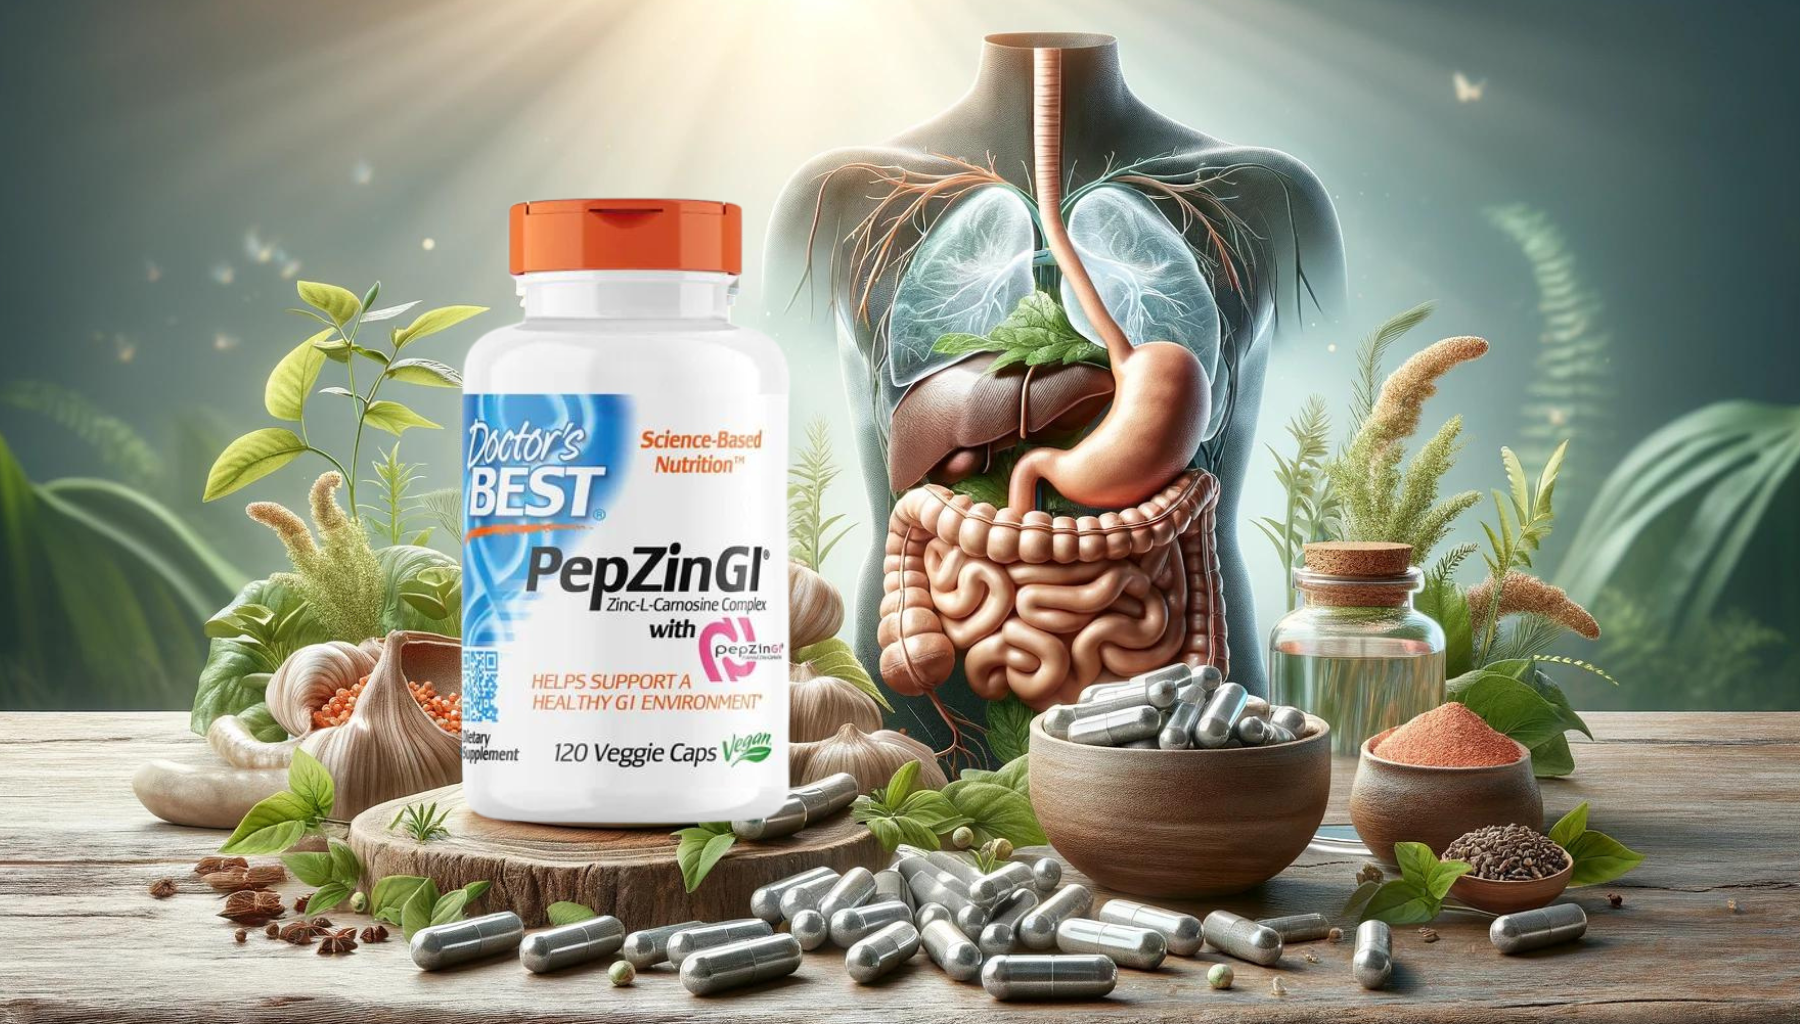 Revolutionize Your Digestive Health with Doctor's Best PepZin GI